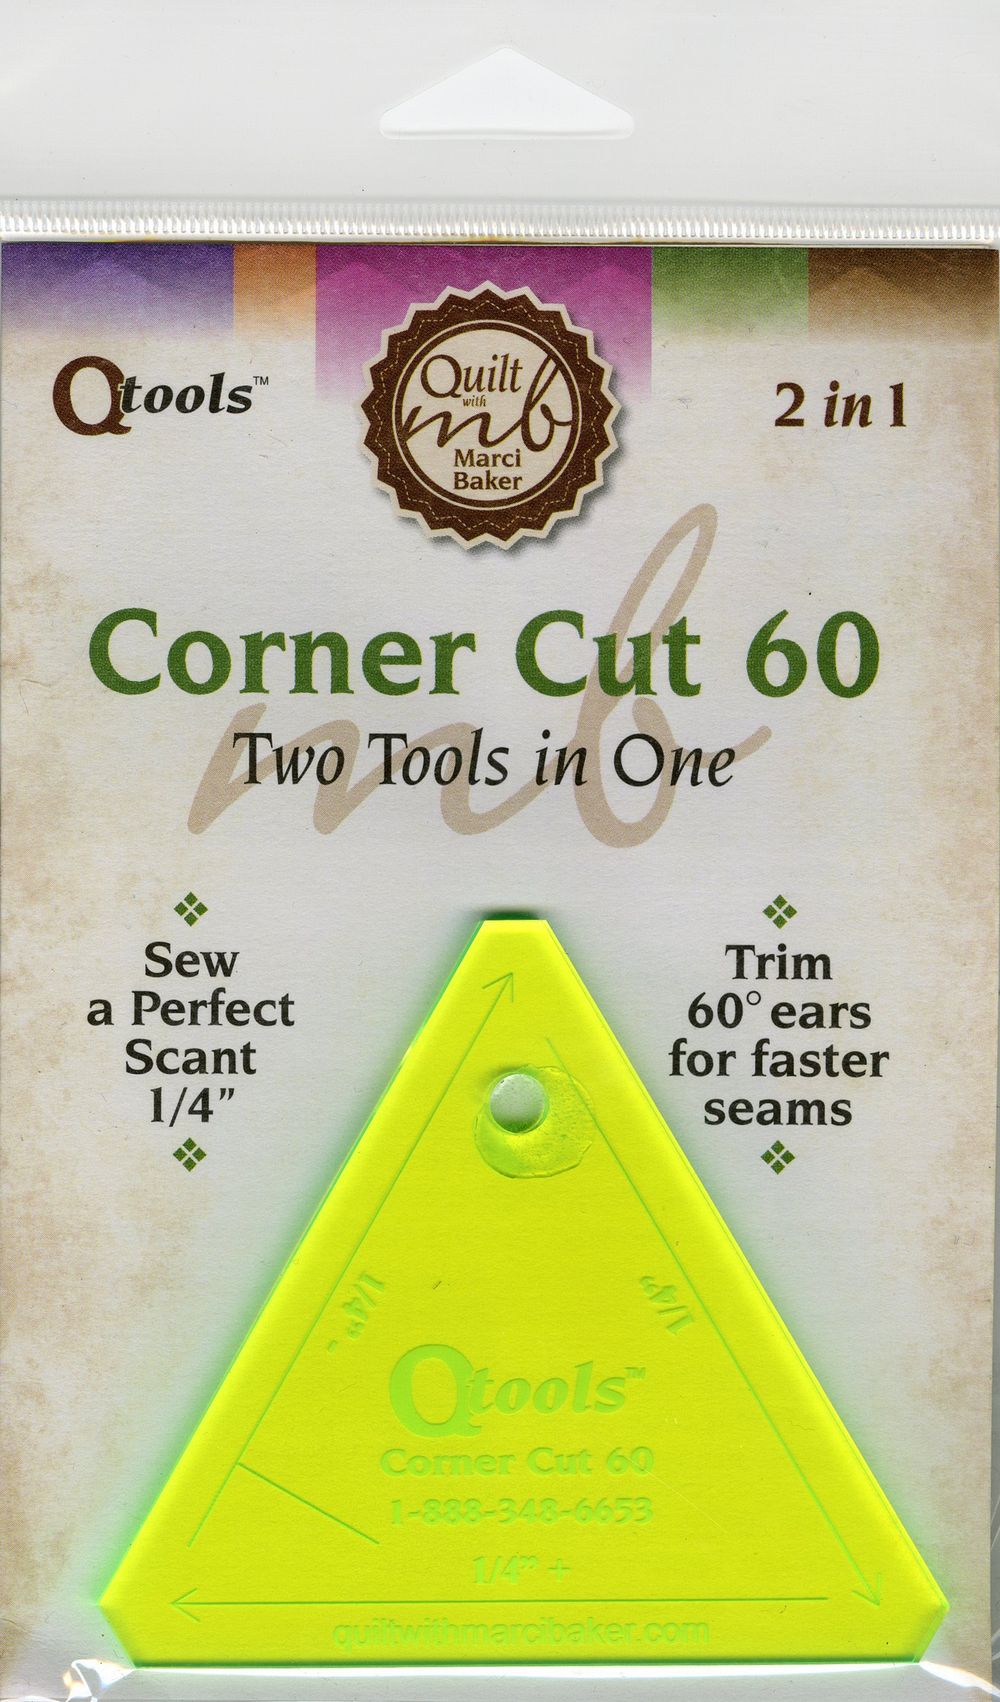 Corner Cut 60 2in1 Sewing Tool from Quilt with Marci Baker